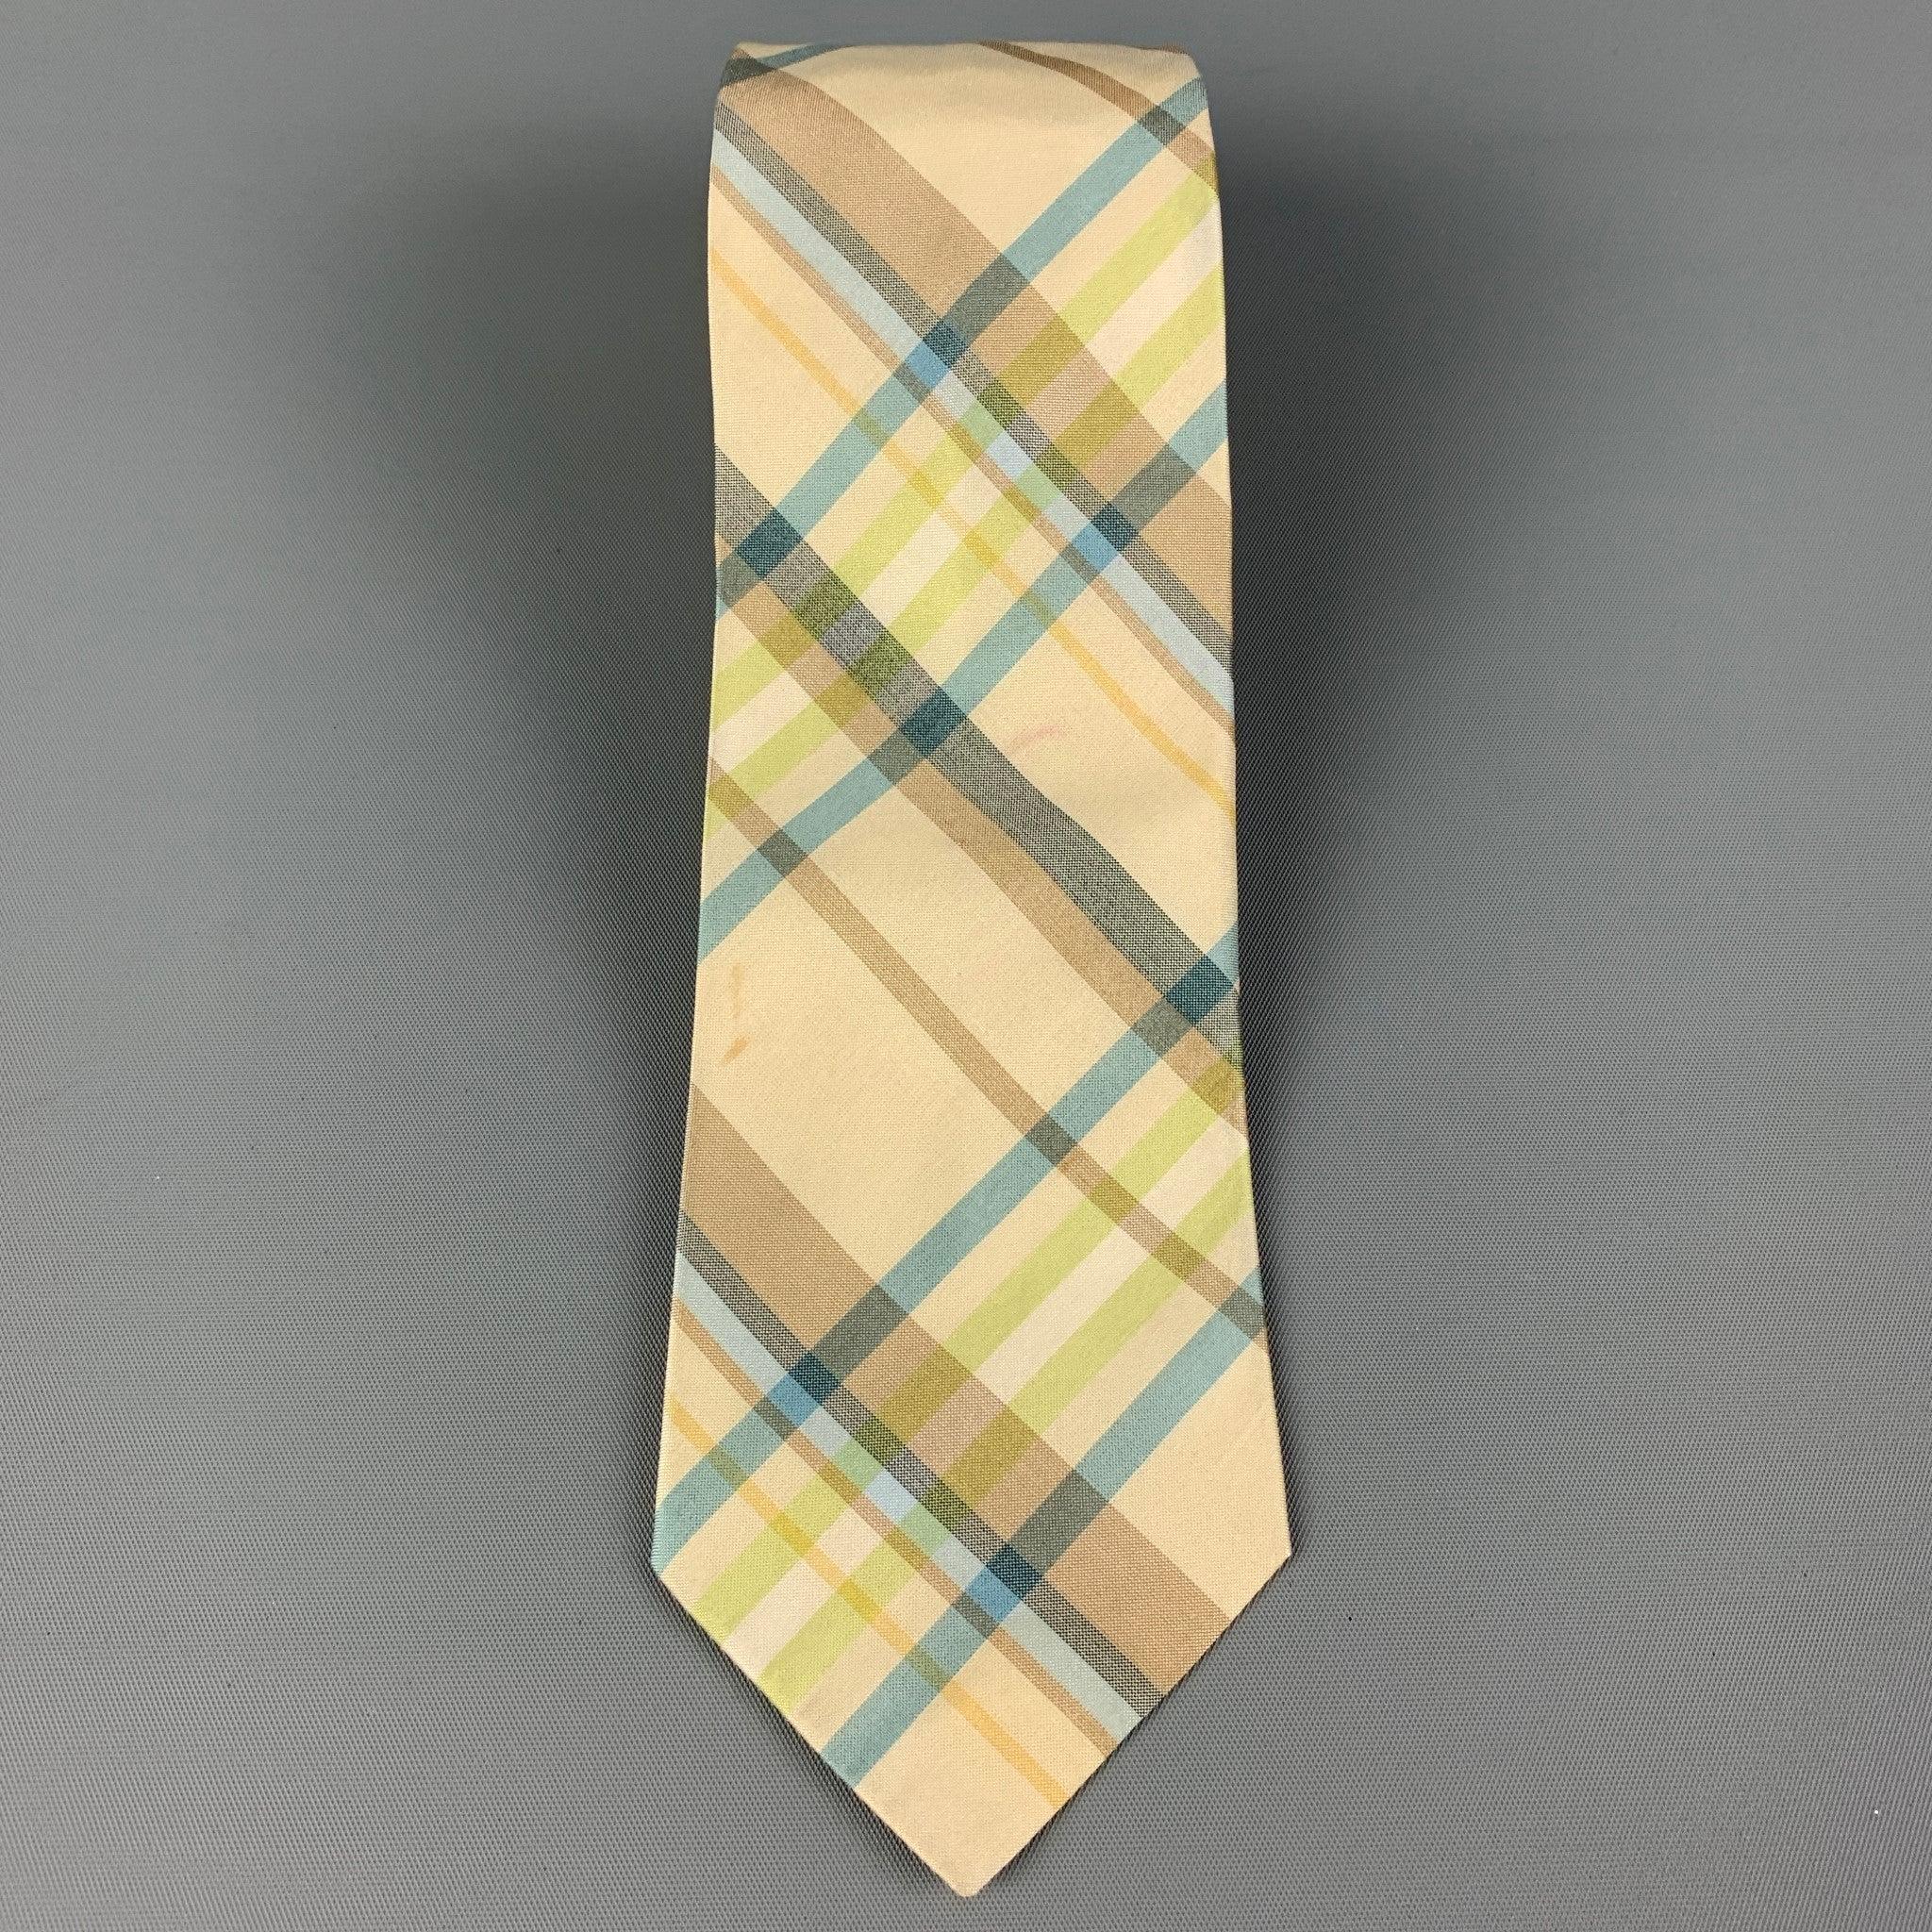 JIL SANDER
 necktie comes in a yellow & blue silk with a all over plaid print. Made in Italy. Good Pre-Owned Condition. Light marks. Width: 2.75 inches Length: 58 inches 
  
  
  
 Sui Generis Reference: 119897
 Category: Tie
 More Details
  
